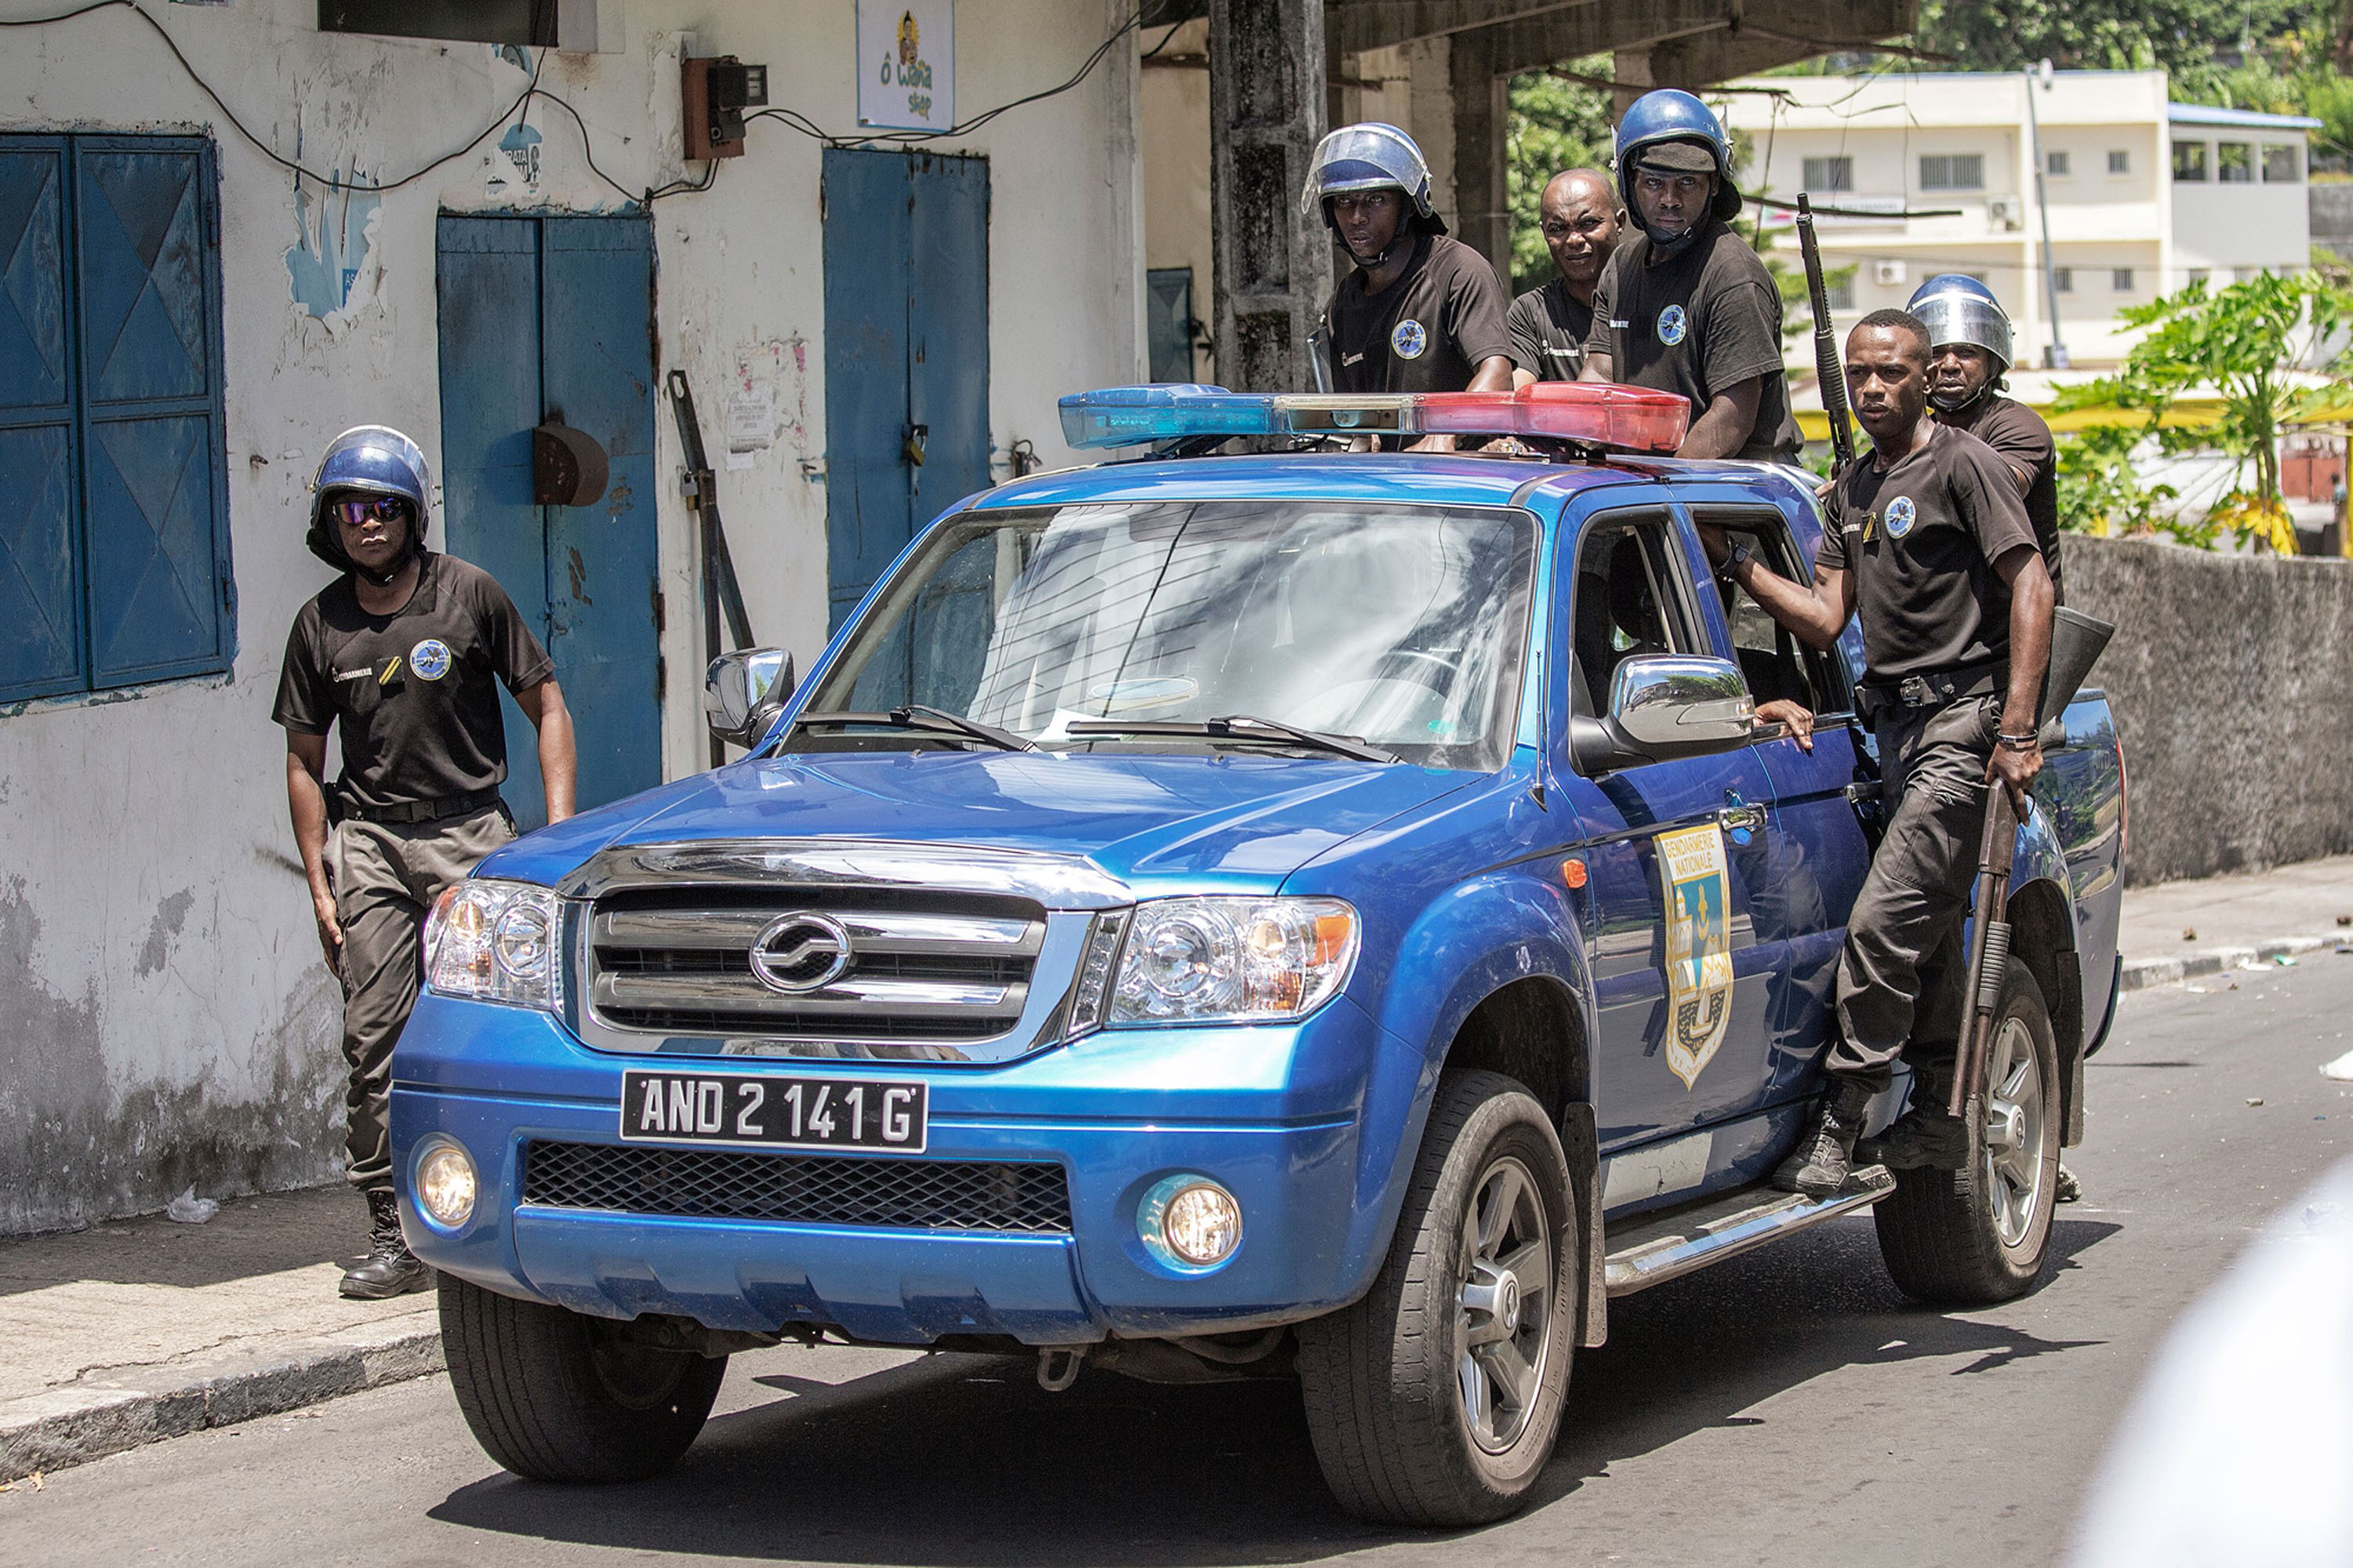 Comoros Gendarmerie officers stand on the back of a car as they disperse opposition supporters, in Moroni, on March 25.